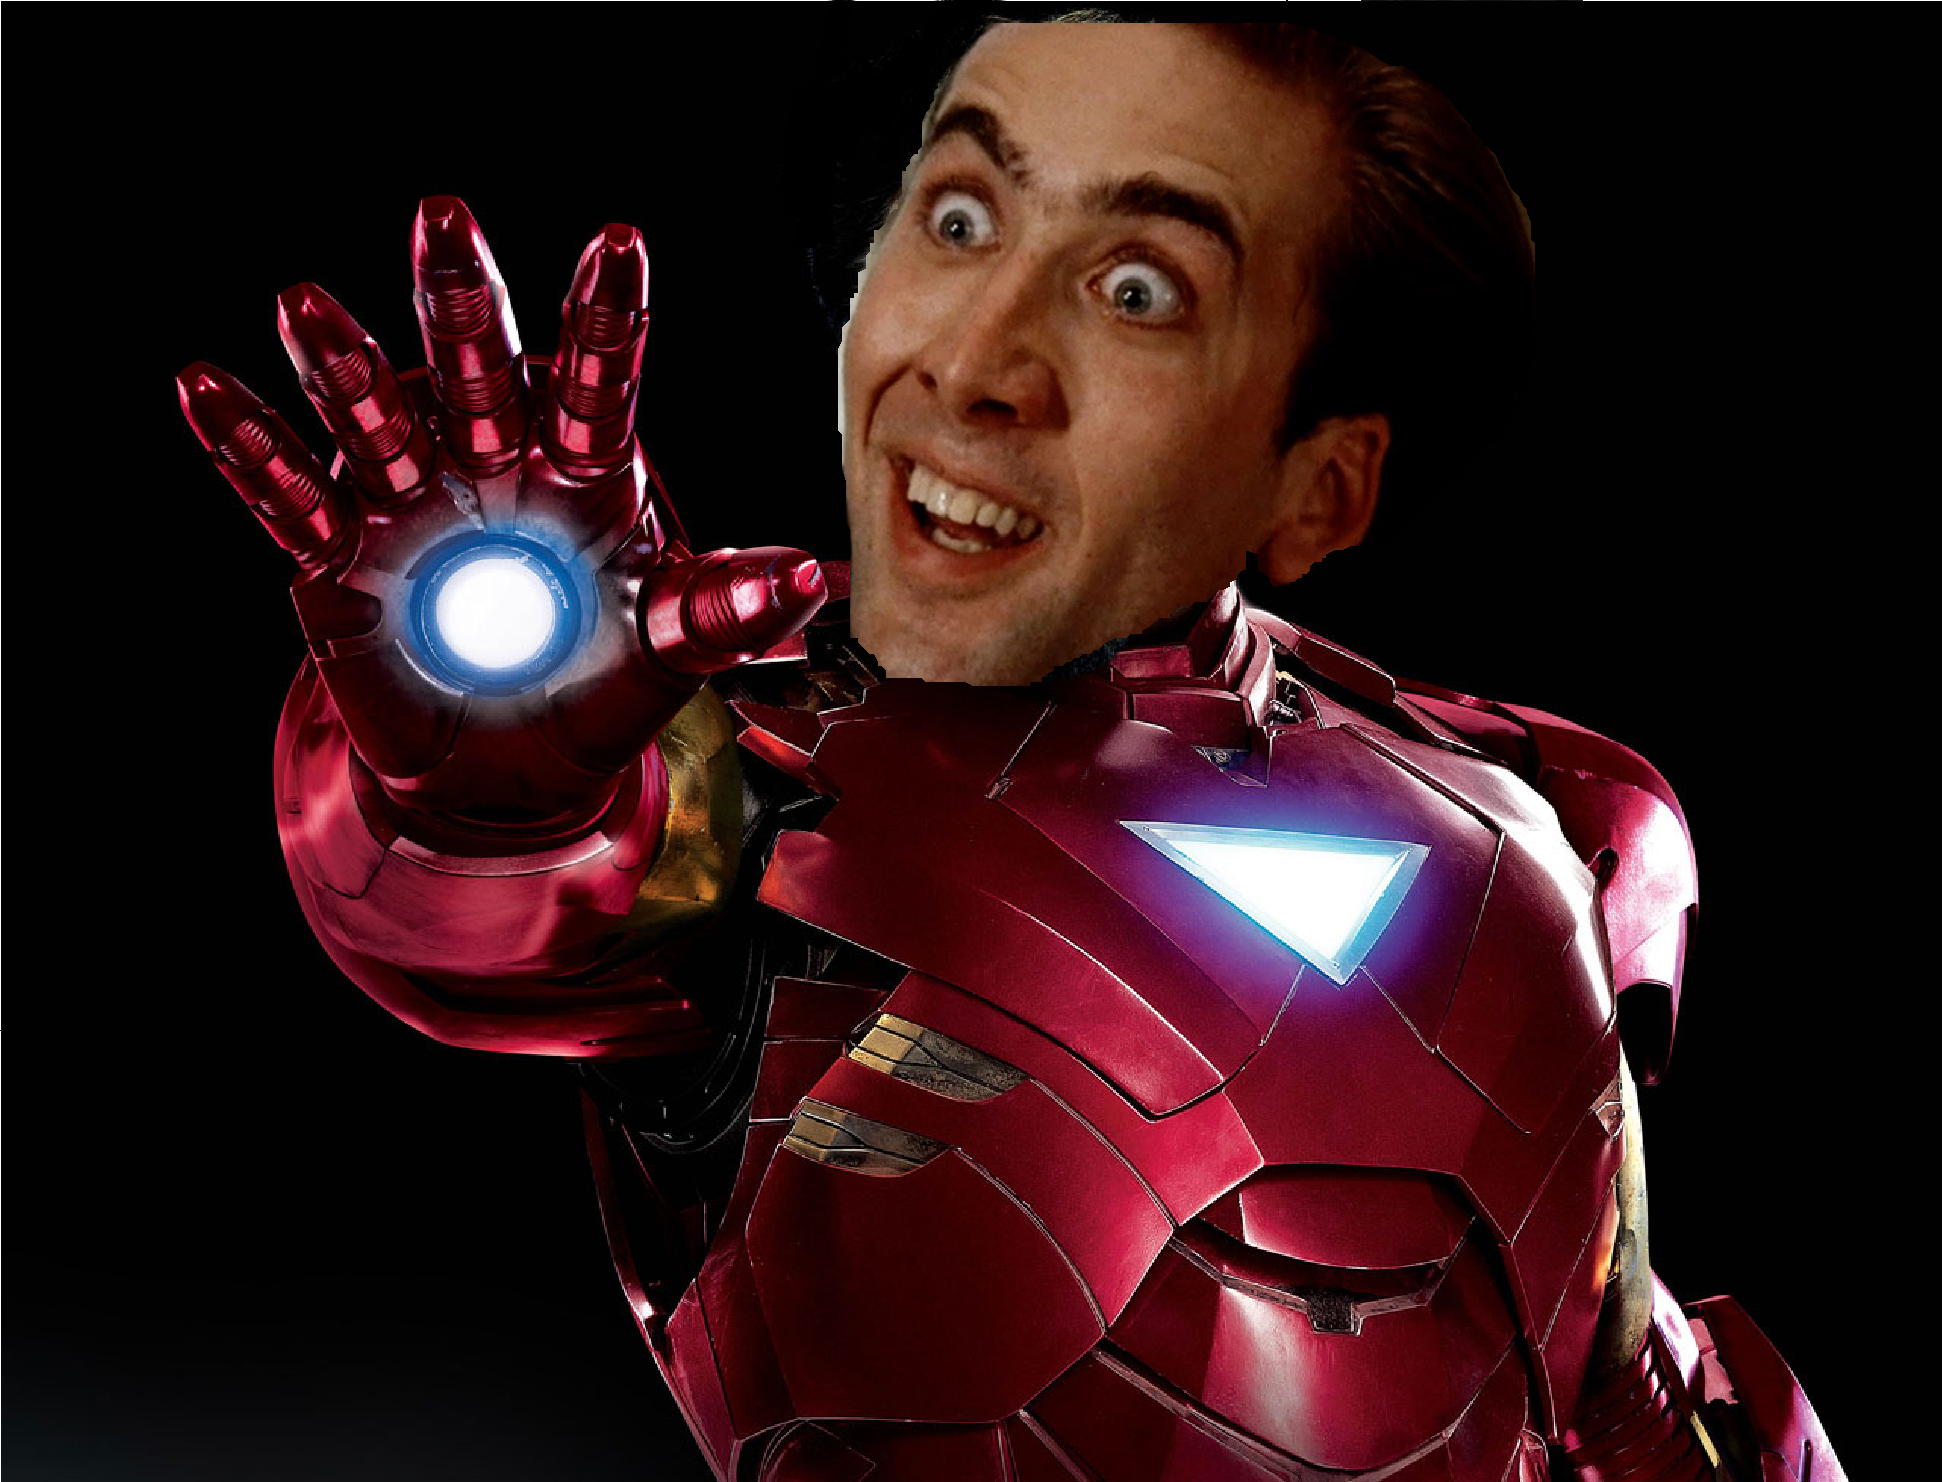 Marvel movies: iron man was almost played by nicolas cage